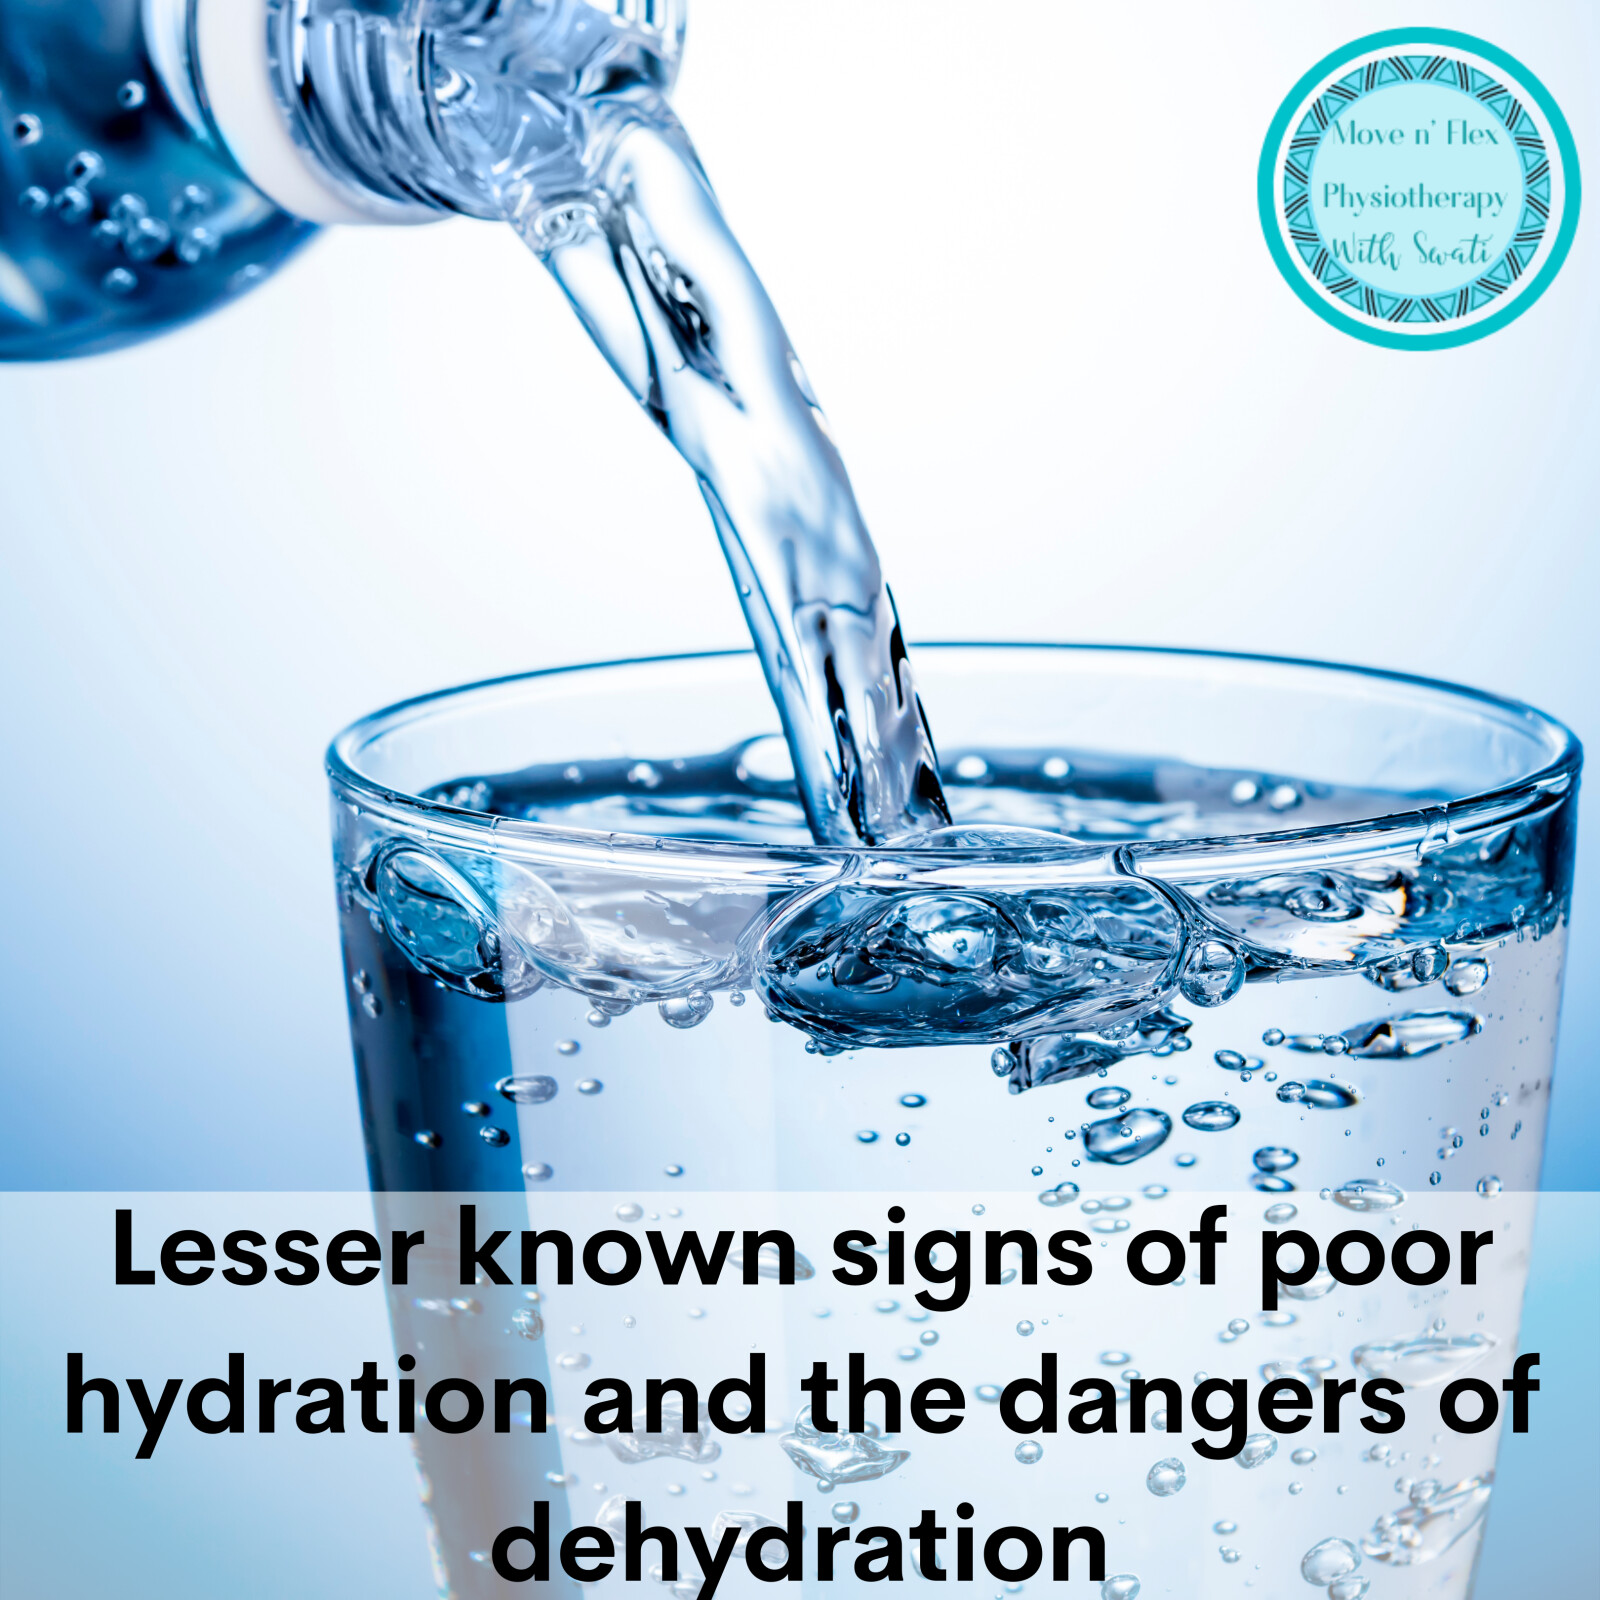 Lesser known signs of poor hydration and the dangers of dehydration